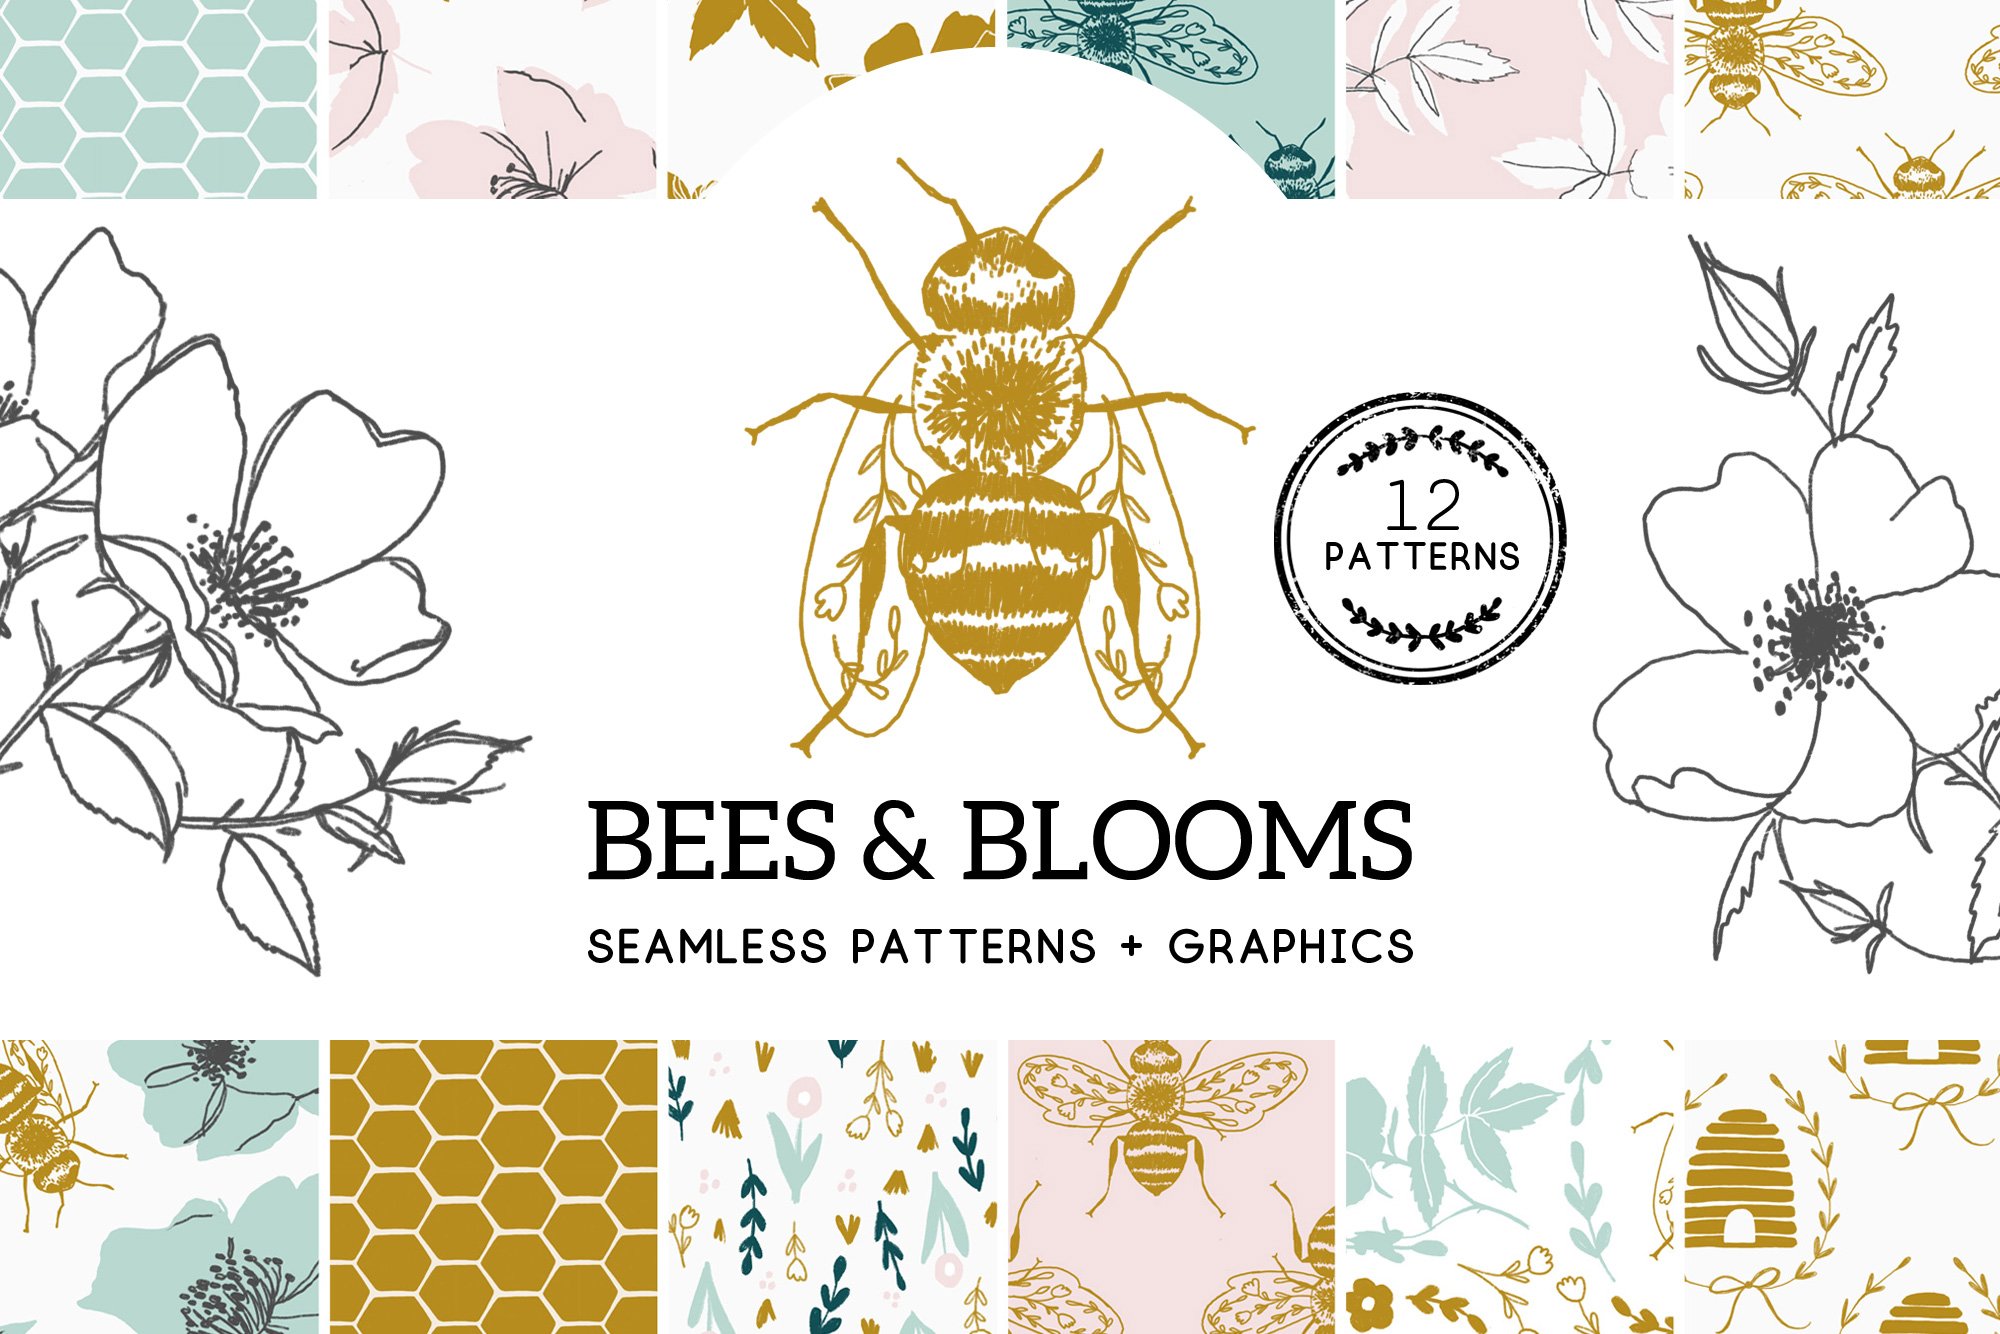 Bees & Blooms - Honeybees and Roses cover image.